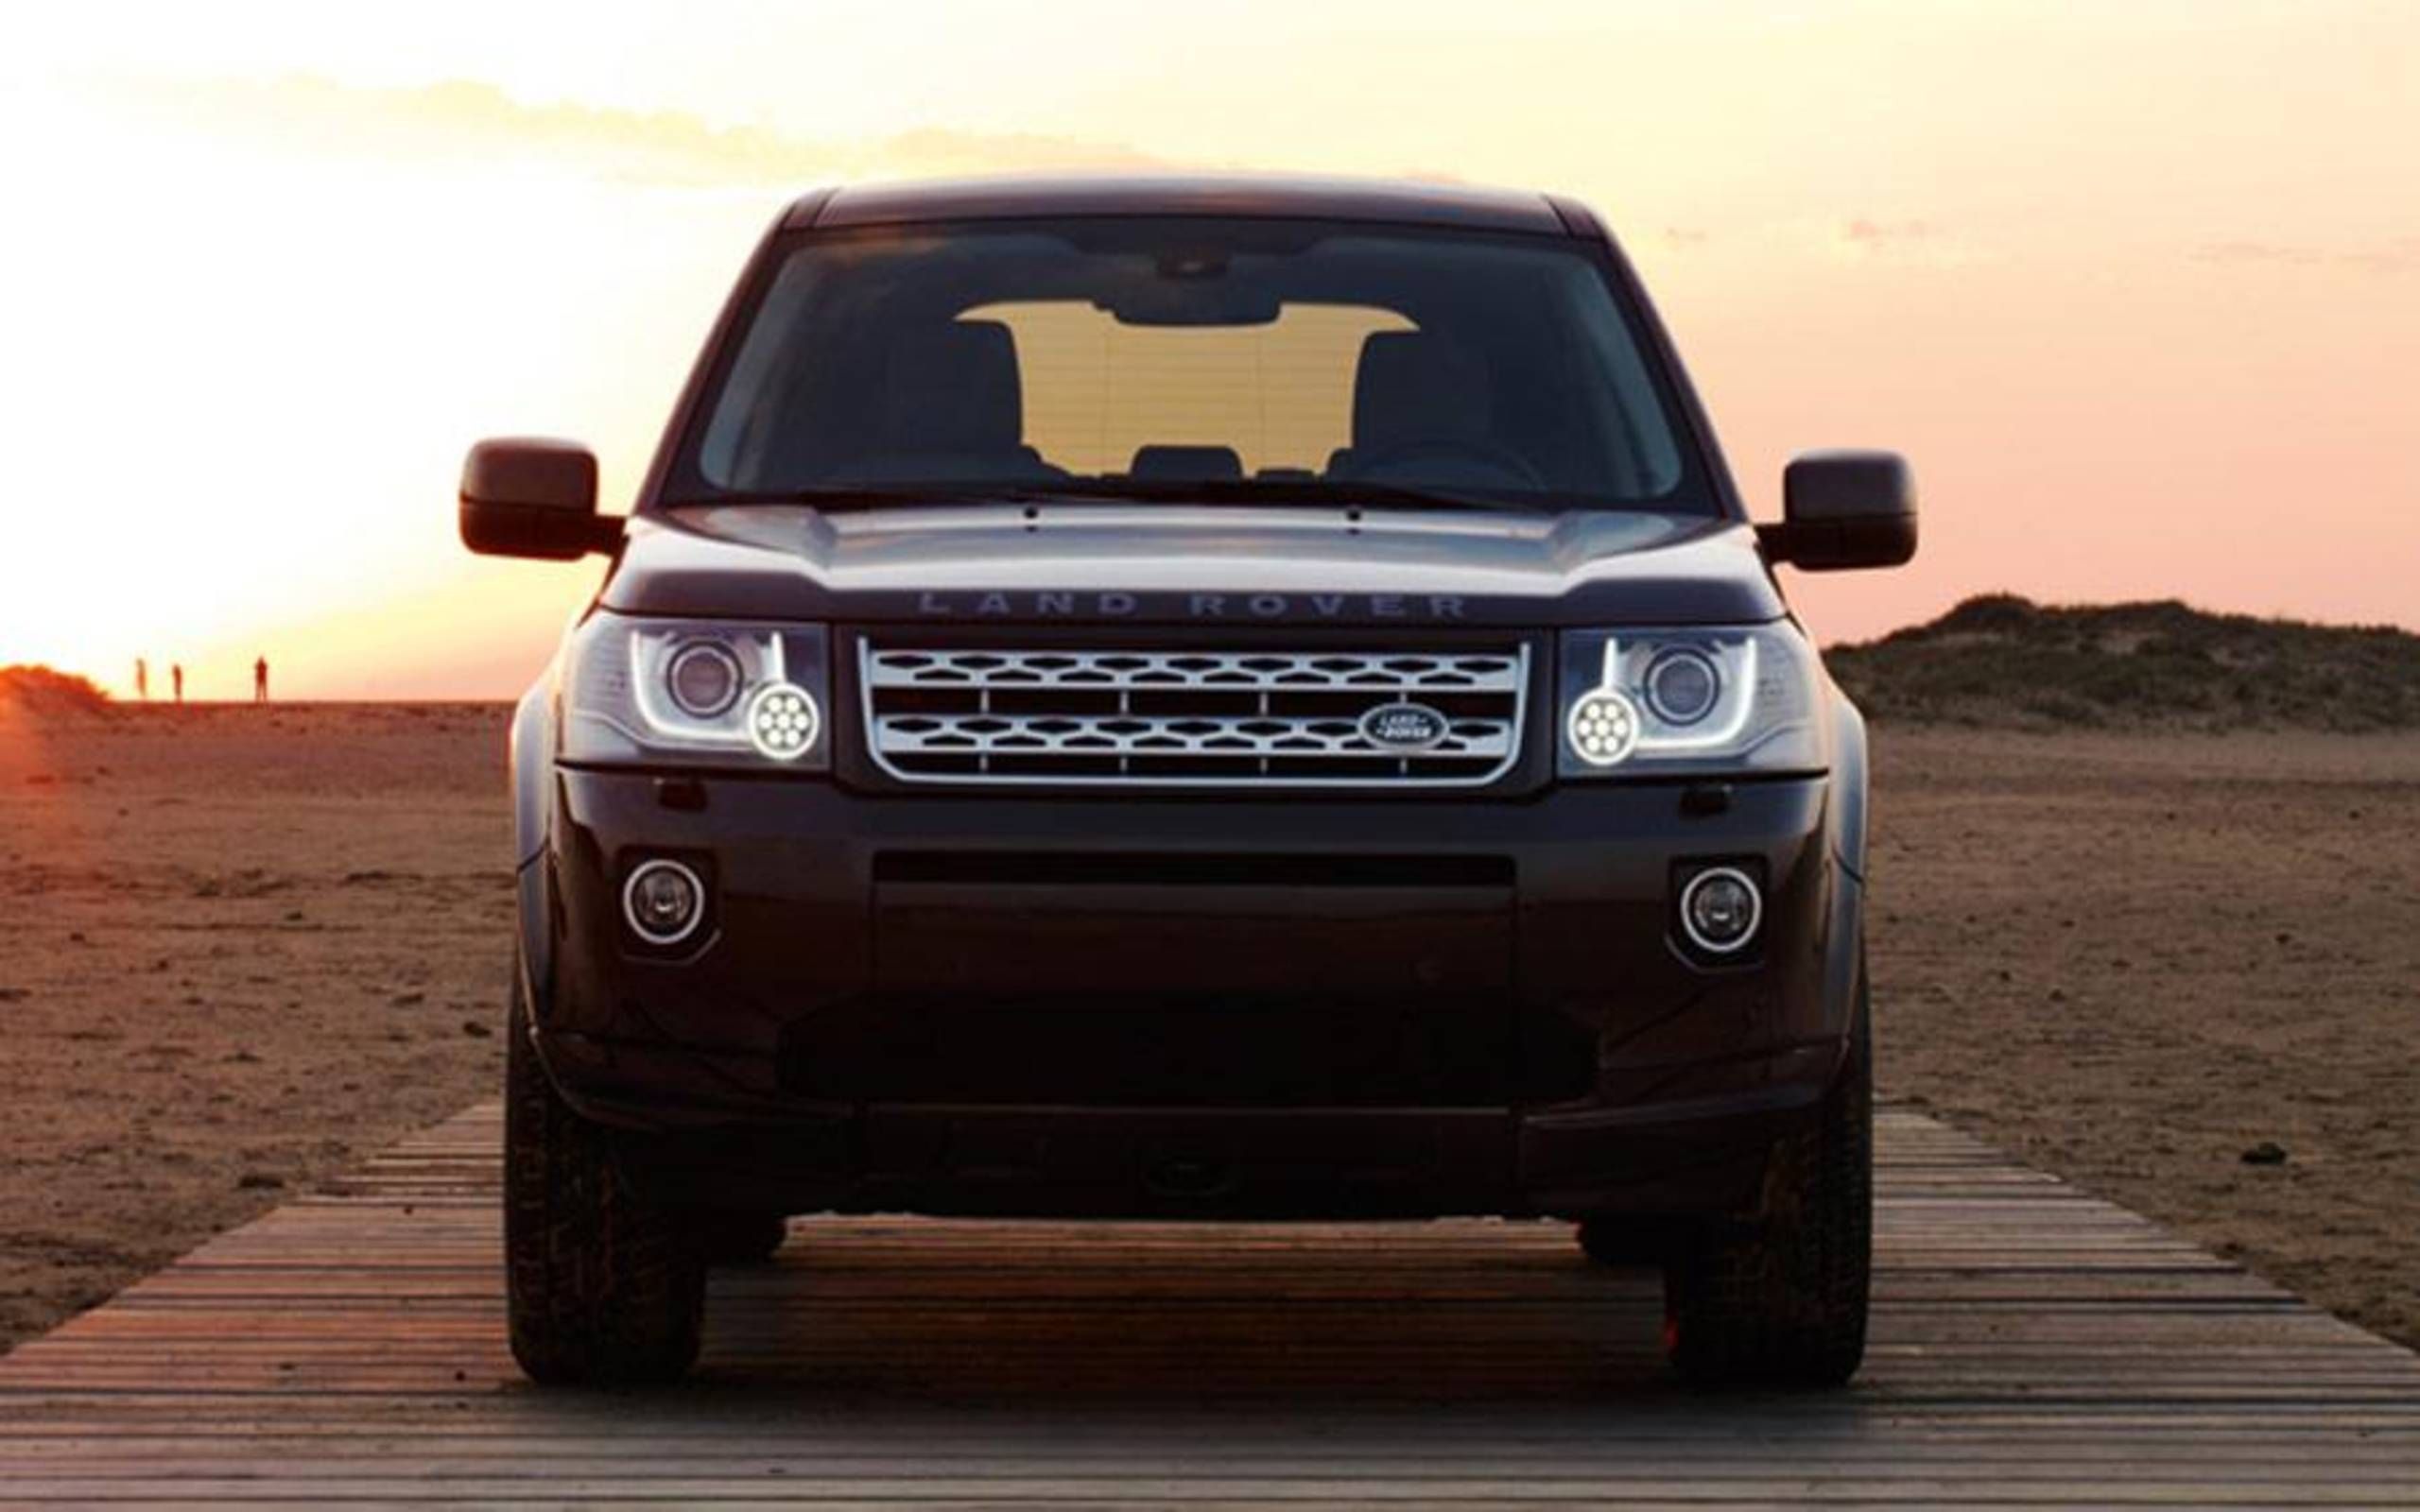 2013 Land Rover LR2 HSE review notes